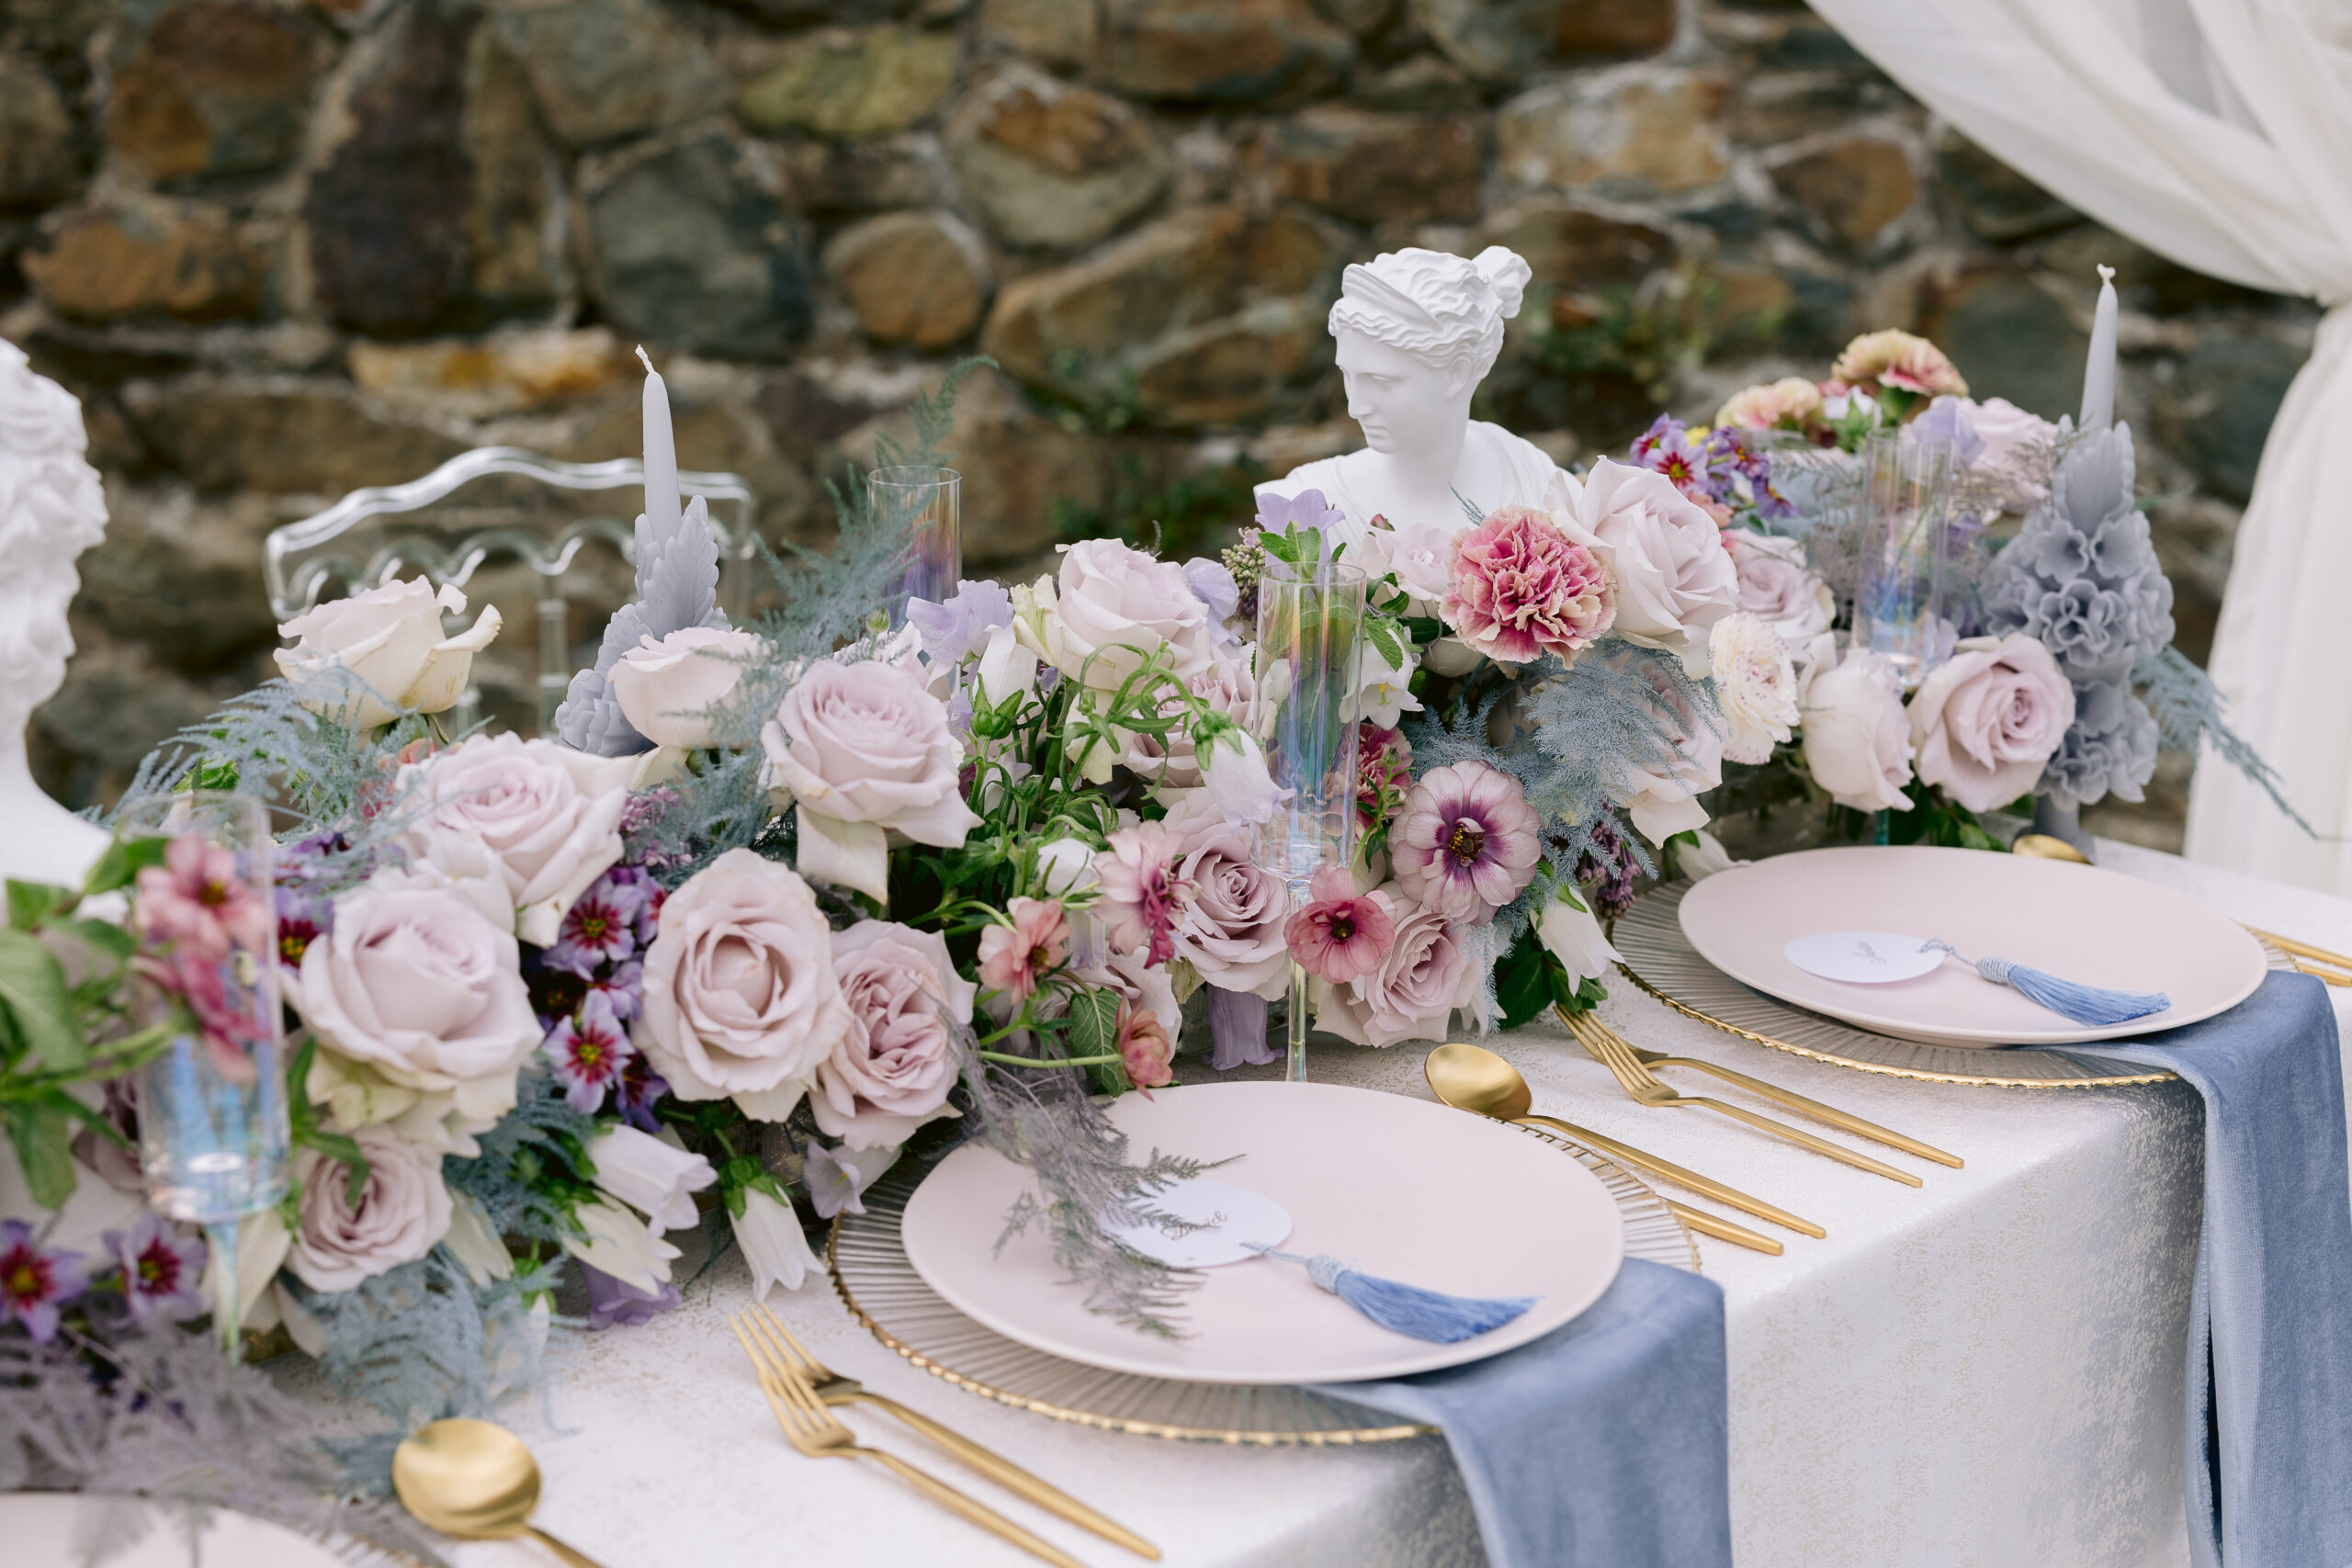 Tablescape with lush whimsical florals